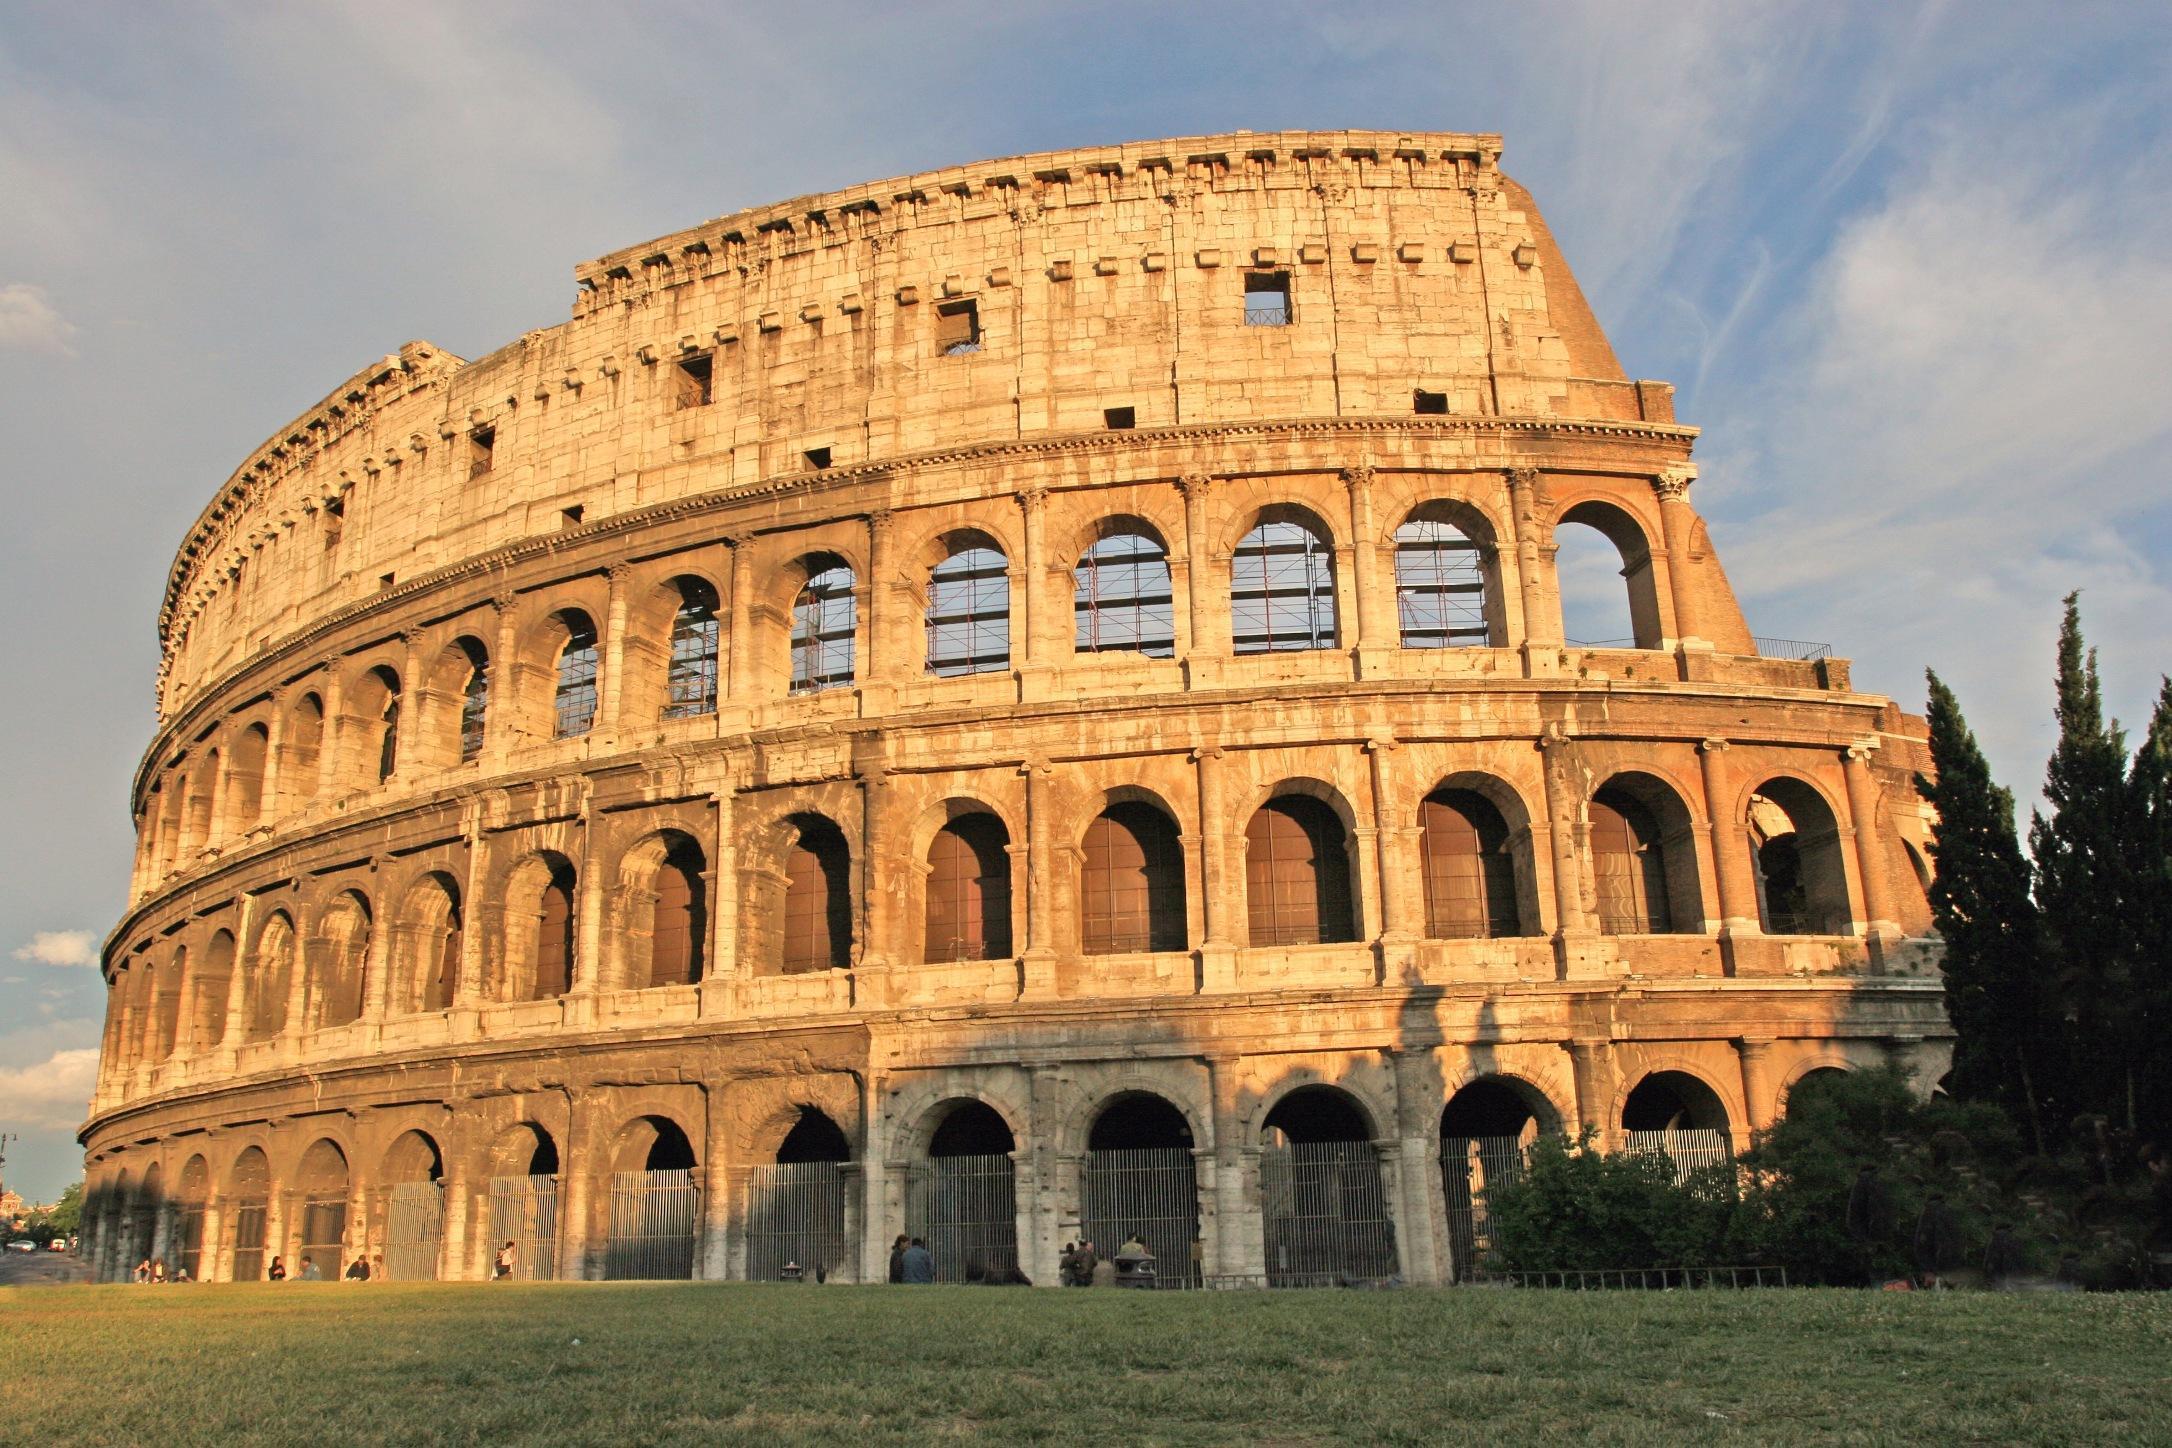 World miracle Colosseum wallpapers free desk 4K backgrounds